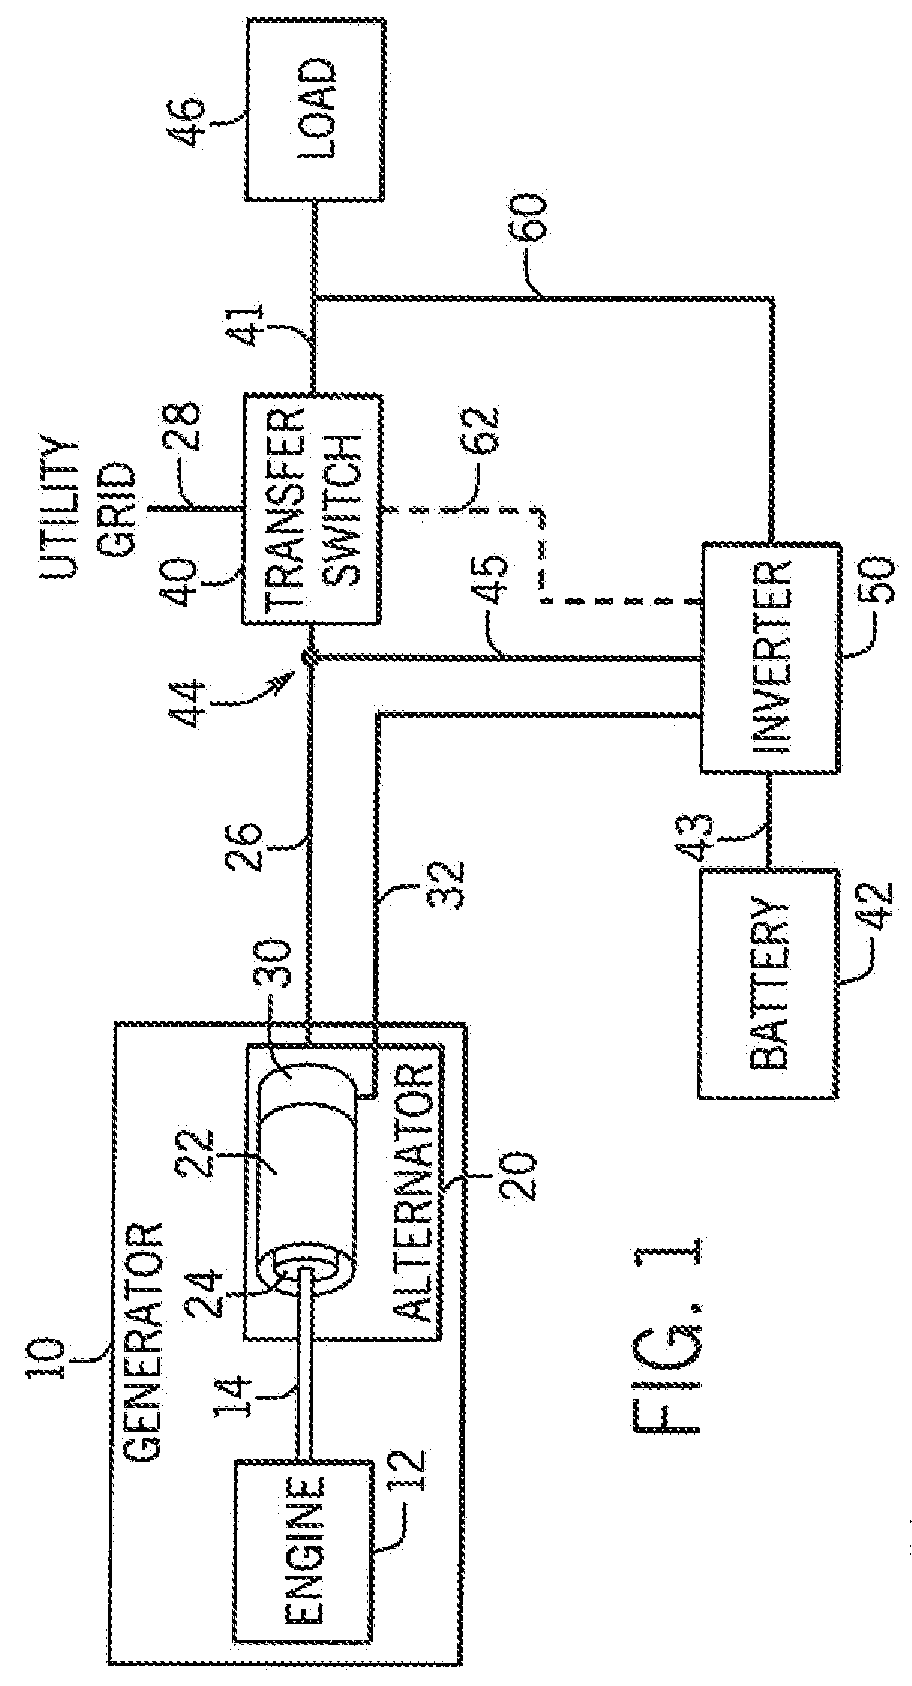 Method of operating a single-phase generator in parallel with an inventor